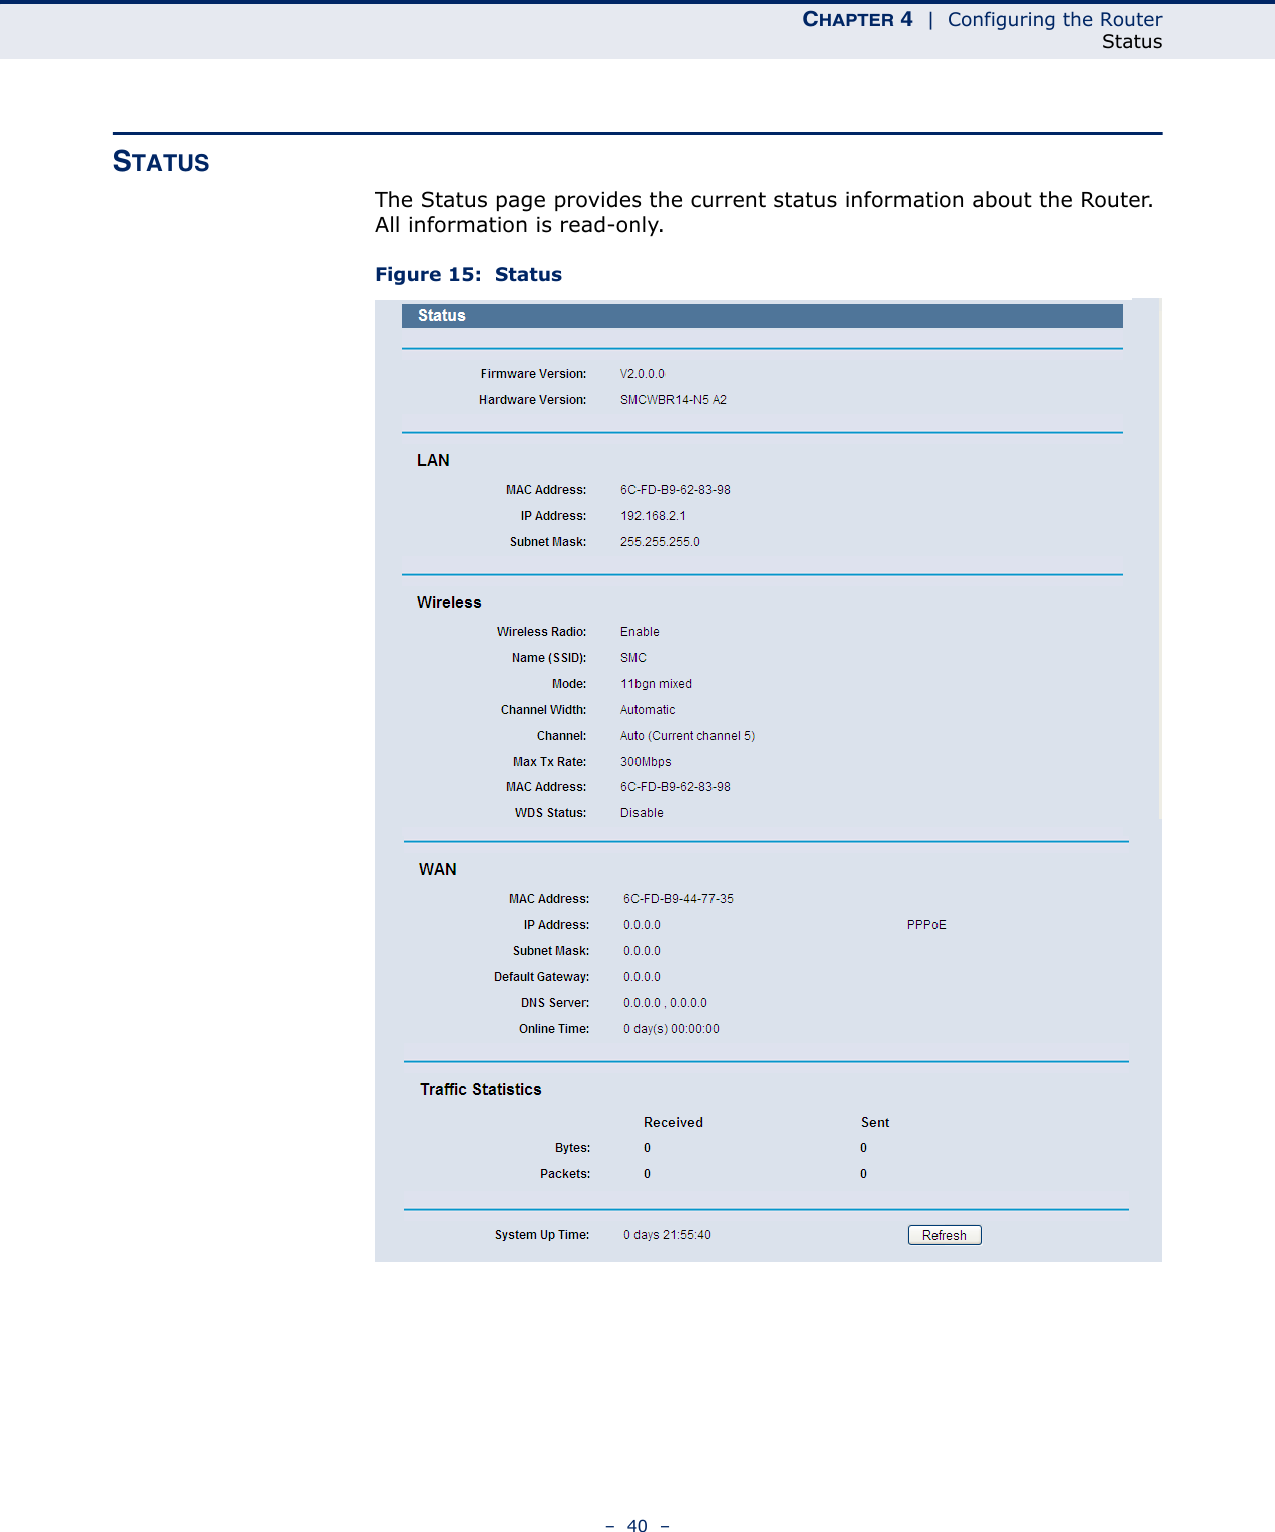 CHAPTER 4  |  Configuring the RouterStatus–  40  –STATUSThe Status page provides the current status information about the Router. All information is read-only.Figure 15:  Status